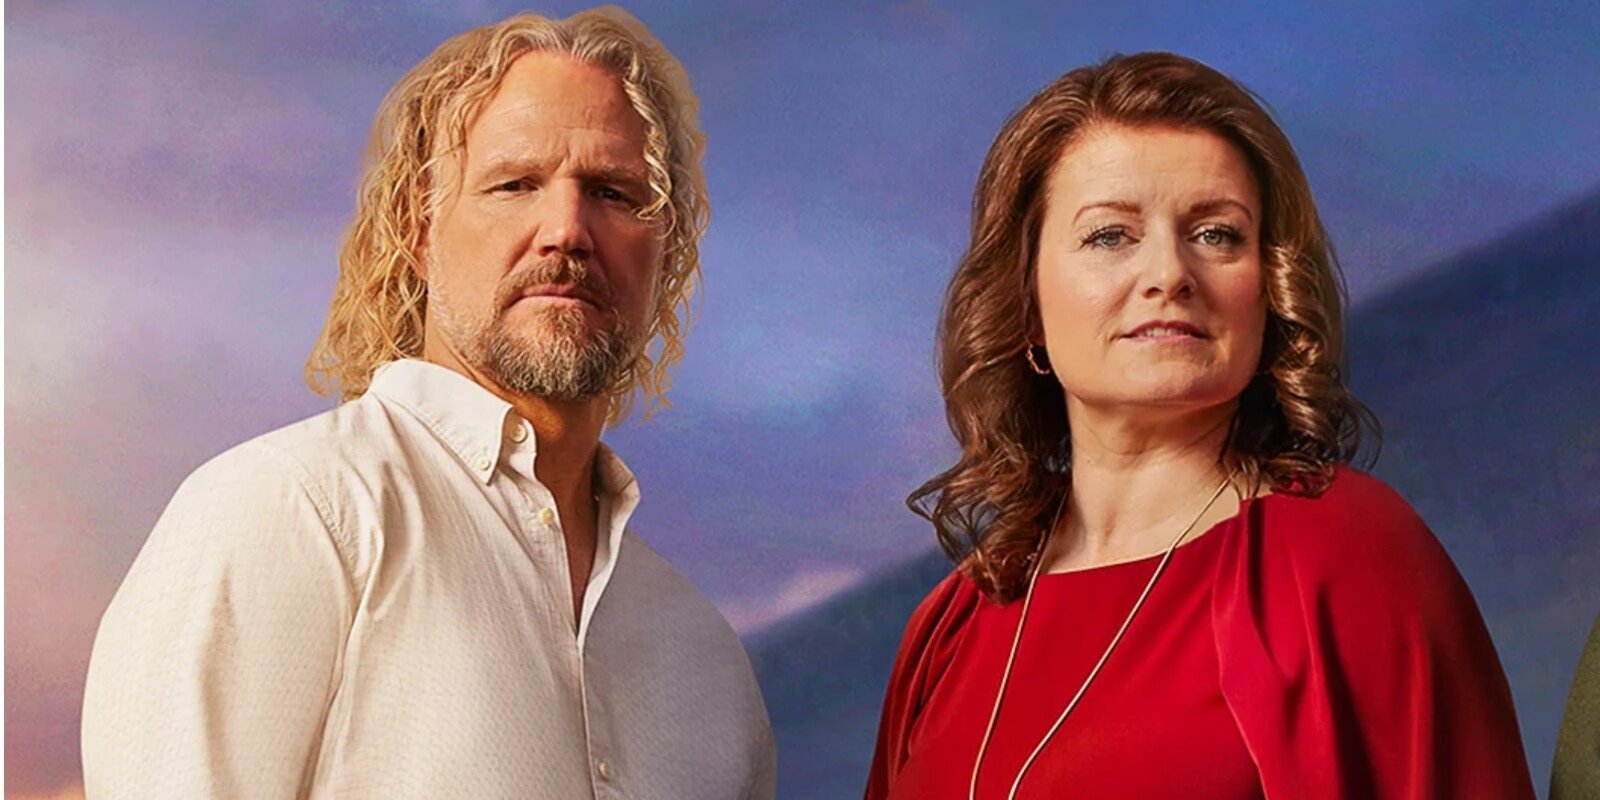 Kody and Robyn Brown in a photograph taken ahead of the season 17 premiere of TLC's 'Sister Wives.'